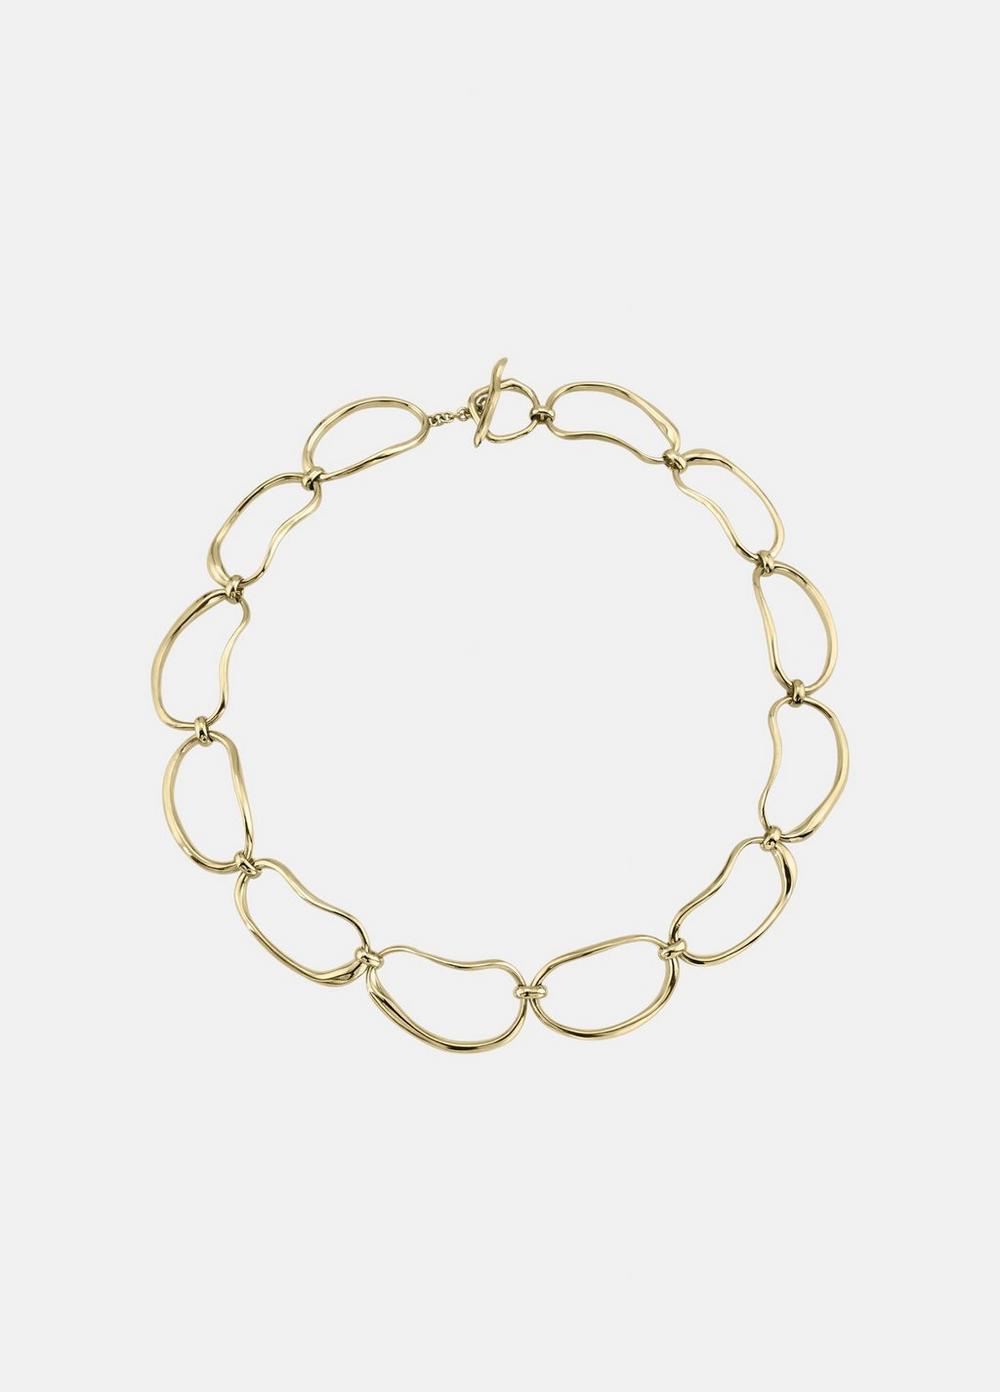 Modern Weaving / Hand Formed Oval Link Chain Necklace